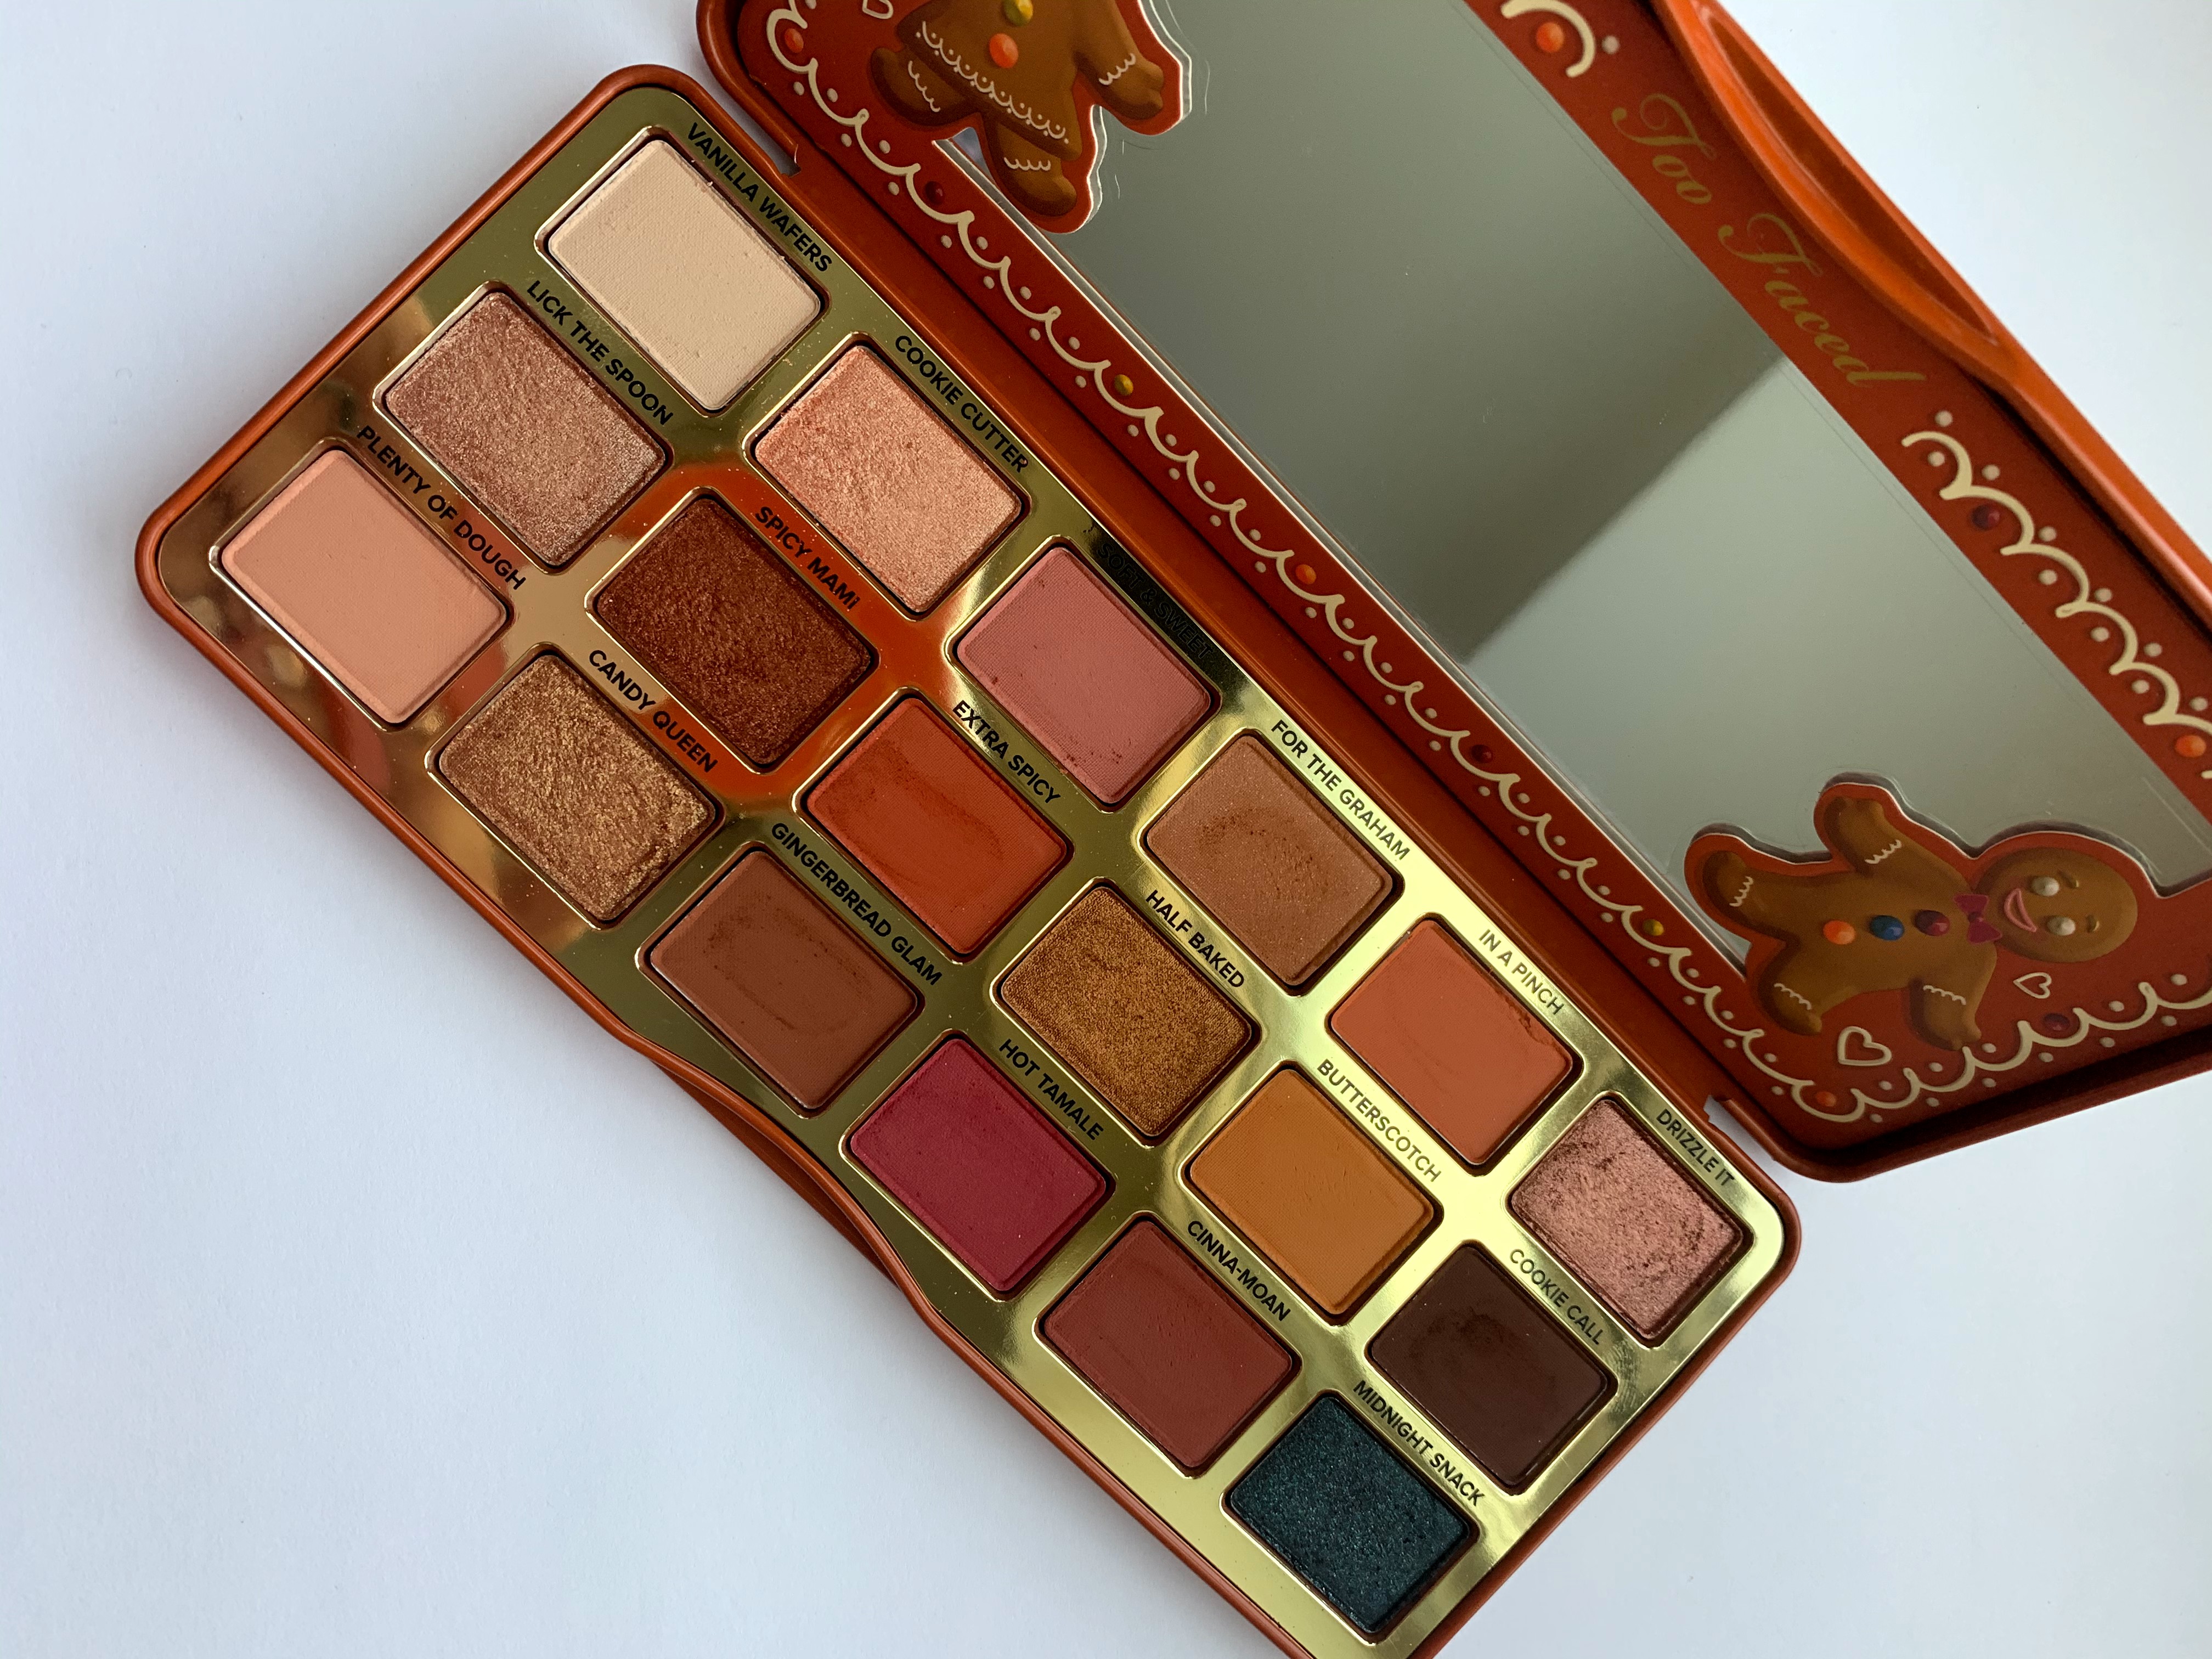 Too Faced Extra Spicy Gingerbread Palette fashion brands.